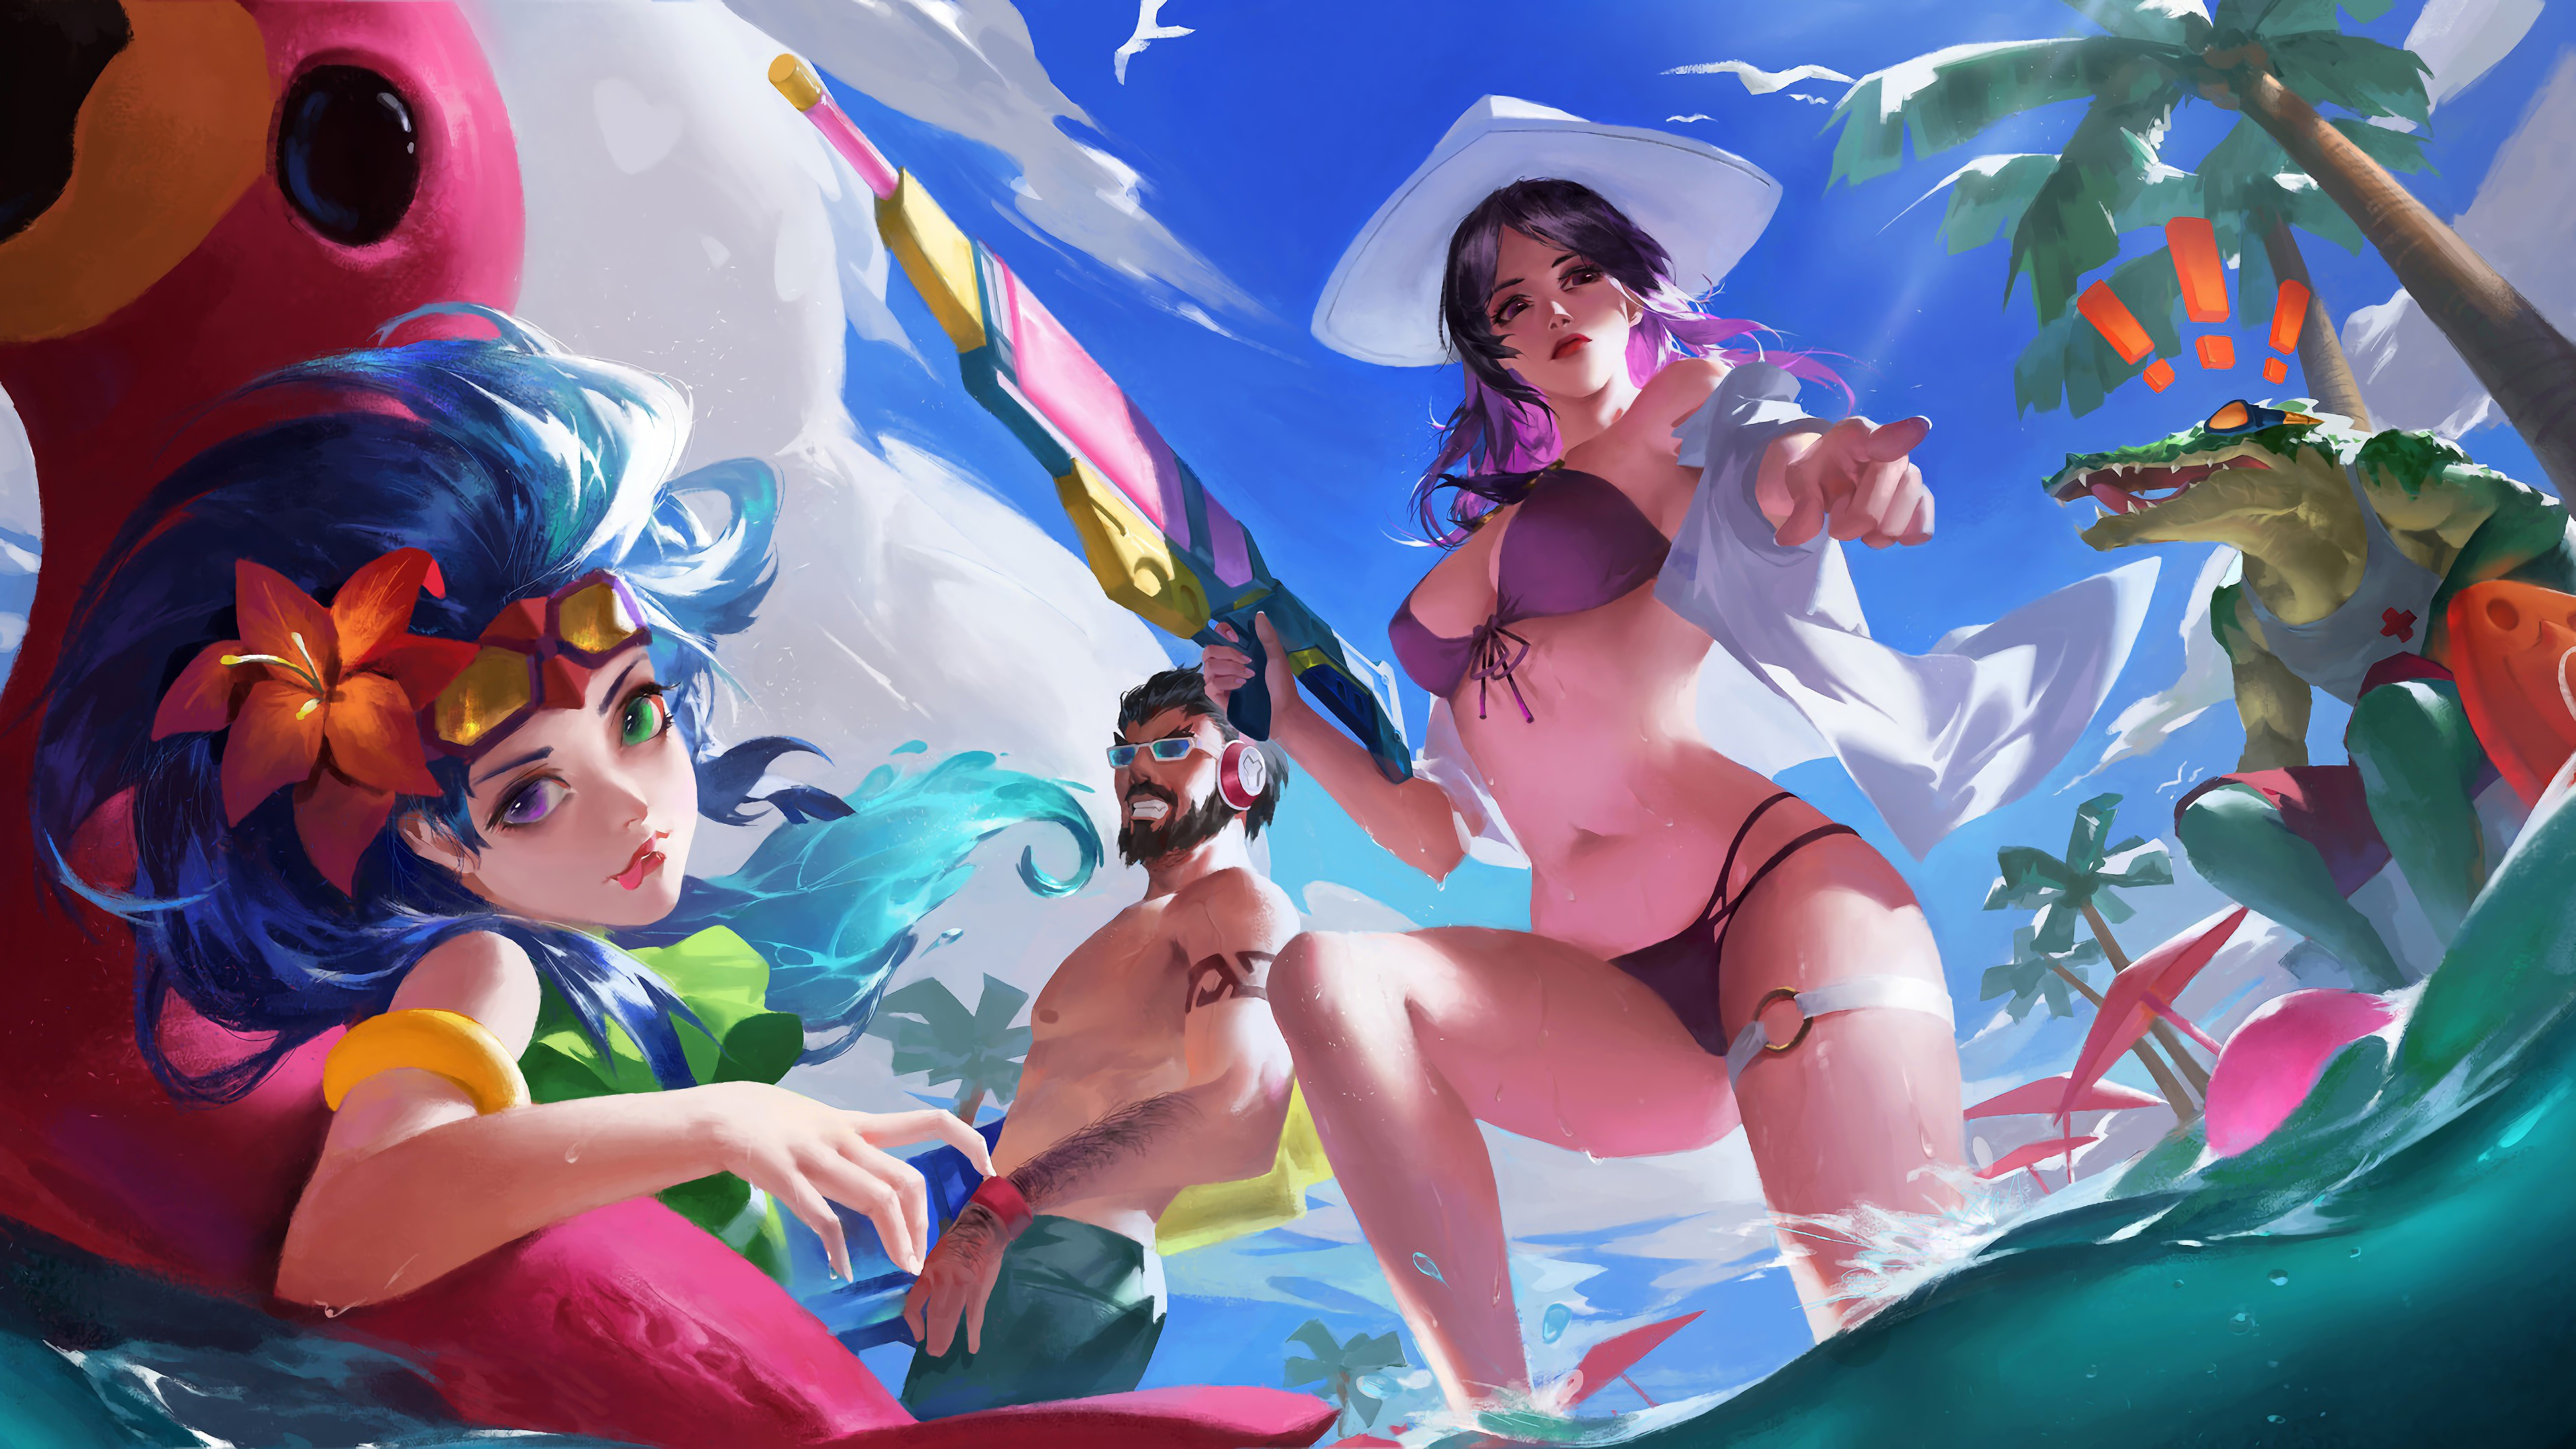 General 3840x2160 League of Legends video games Caitlyn (League of Legends) pool party Zoe (League of Legends) Graves Renekton finger pointing water guns palm trees floater flower in hair hat standing in water